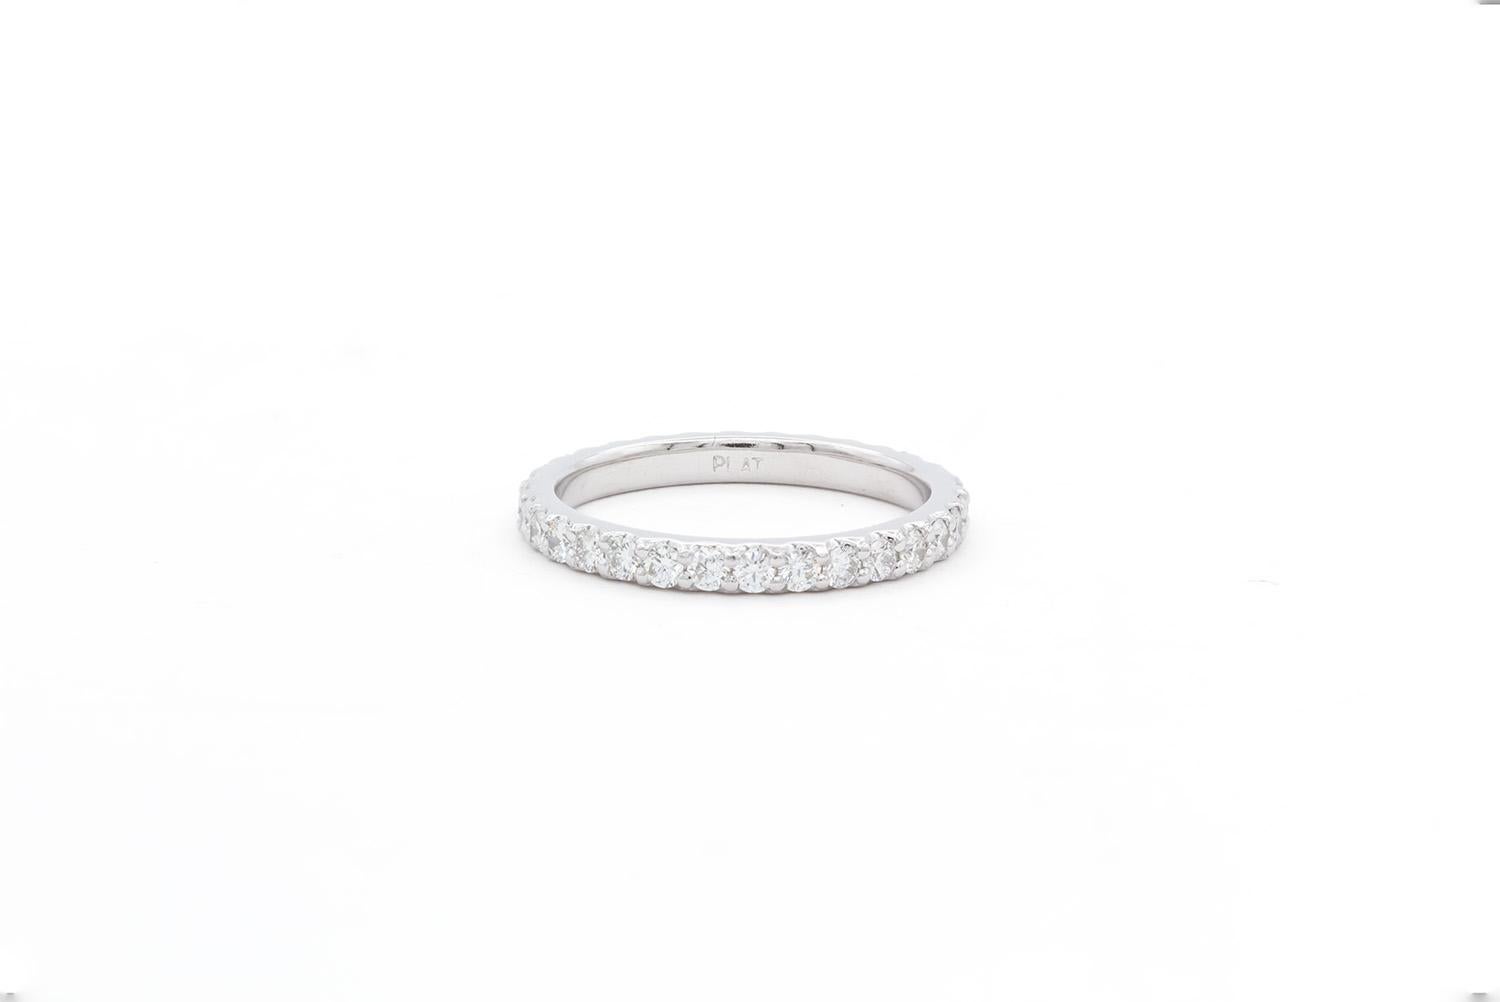 We are pleased to offer this Platinum Round Brilliant Diamond Eternity U Pave Wedding Band. This beautiful wedding band features an eternity style band with an estimated 0.90ctw F-G/VS-SI round brilliant cut diamonds all set in a stunning platinum u